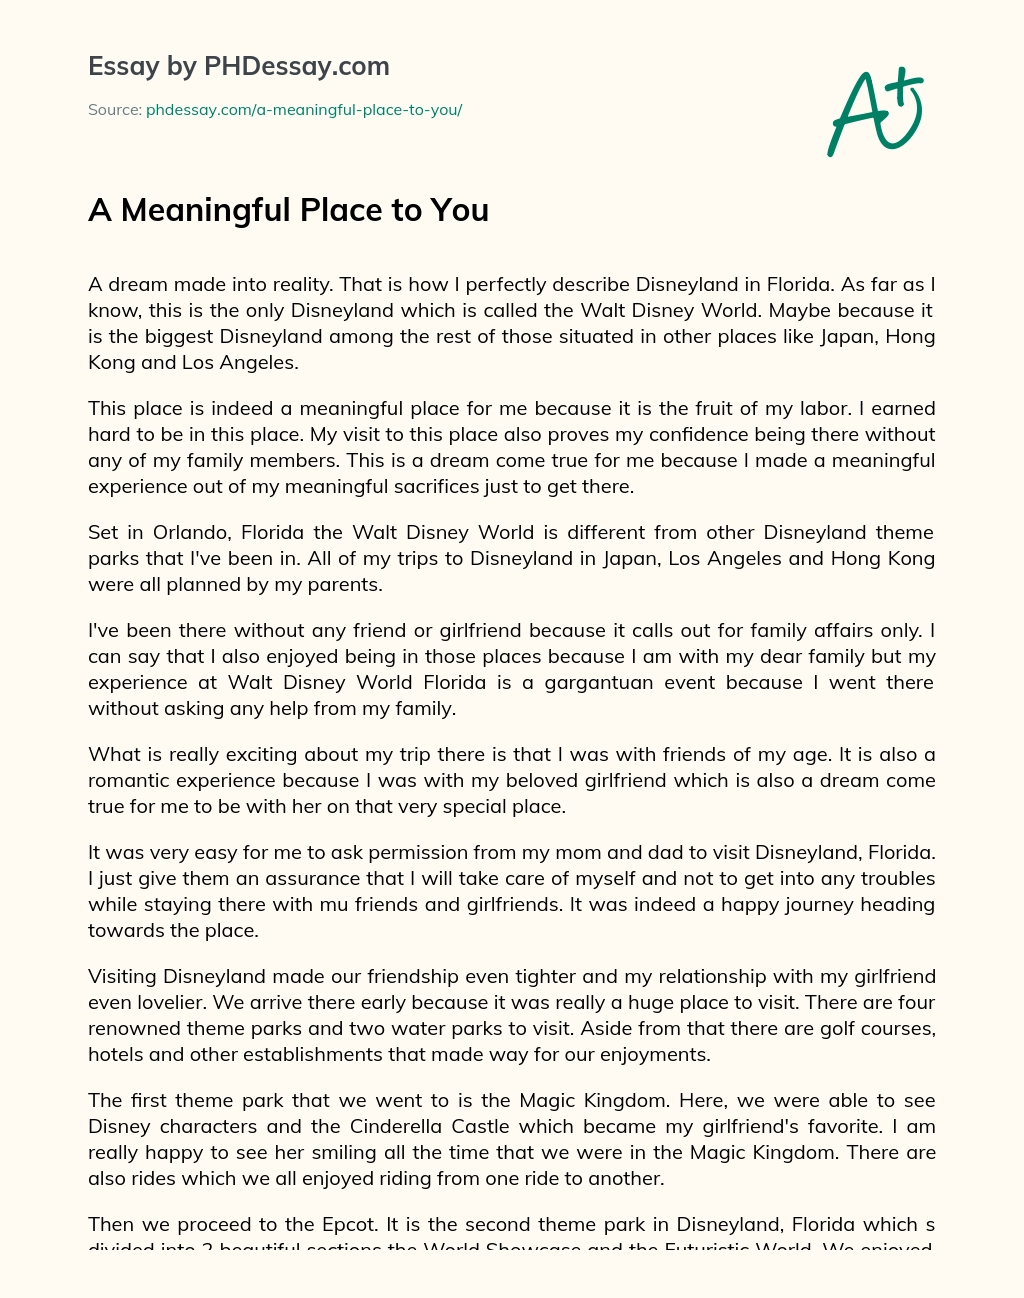 A Meaningful Place to You essay